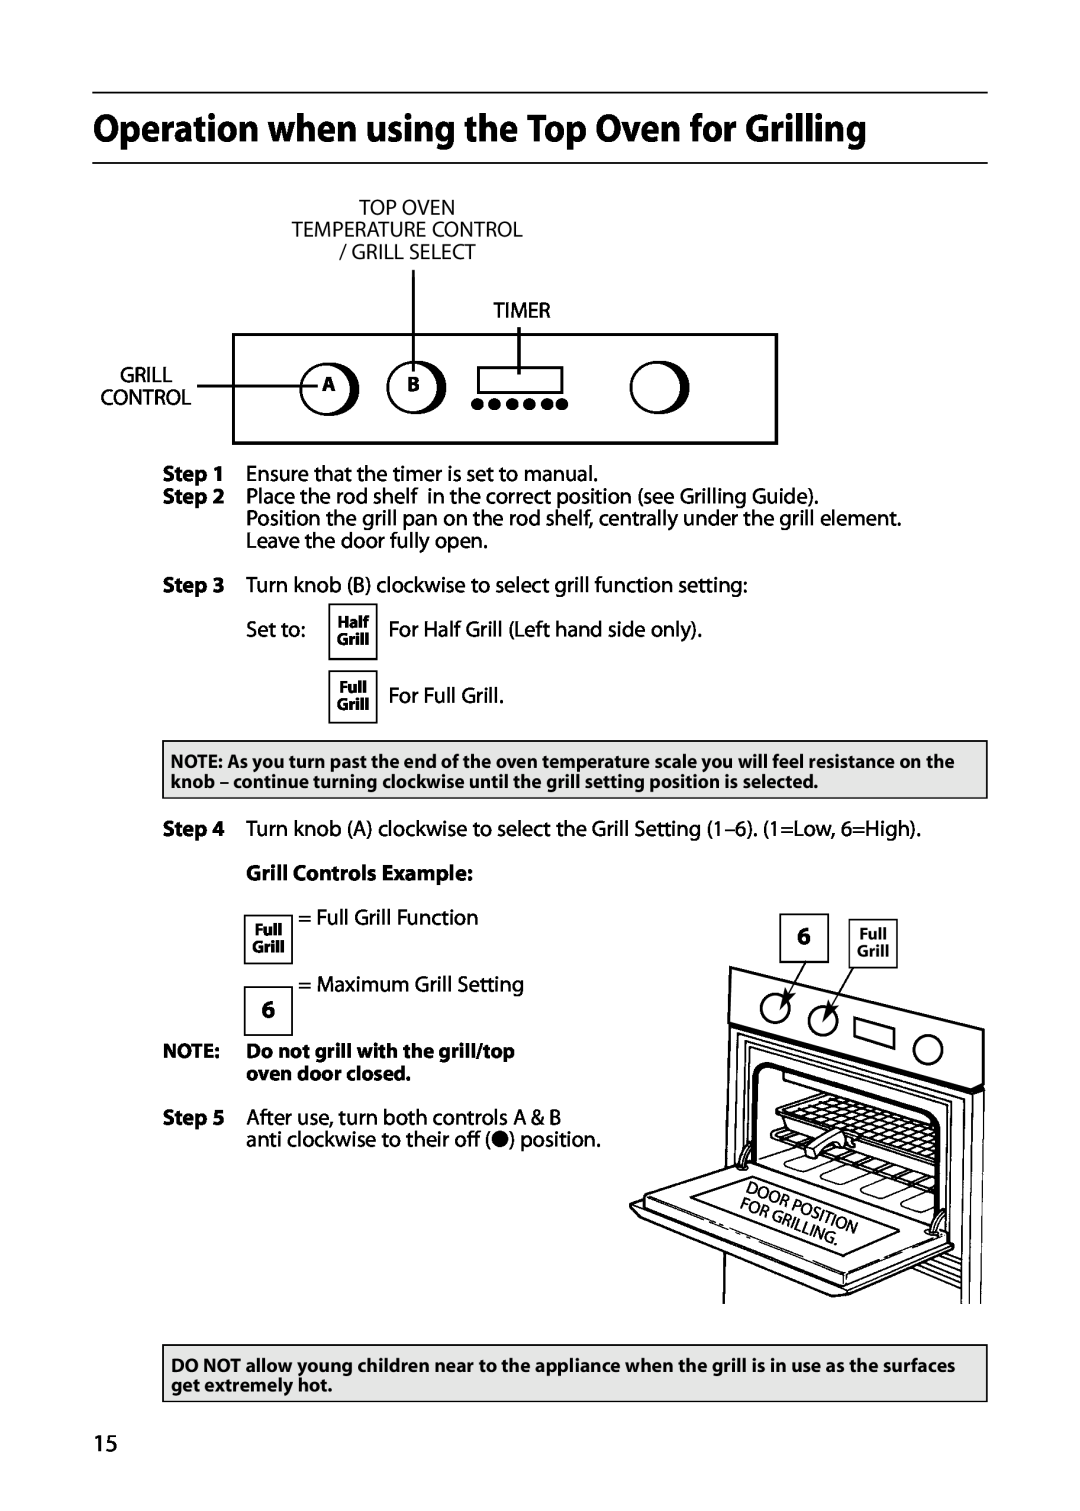 Hotpoint S130E manual Operation when using the Top Oven for Grilling, Grill Controls Example 